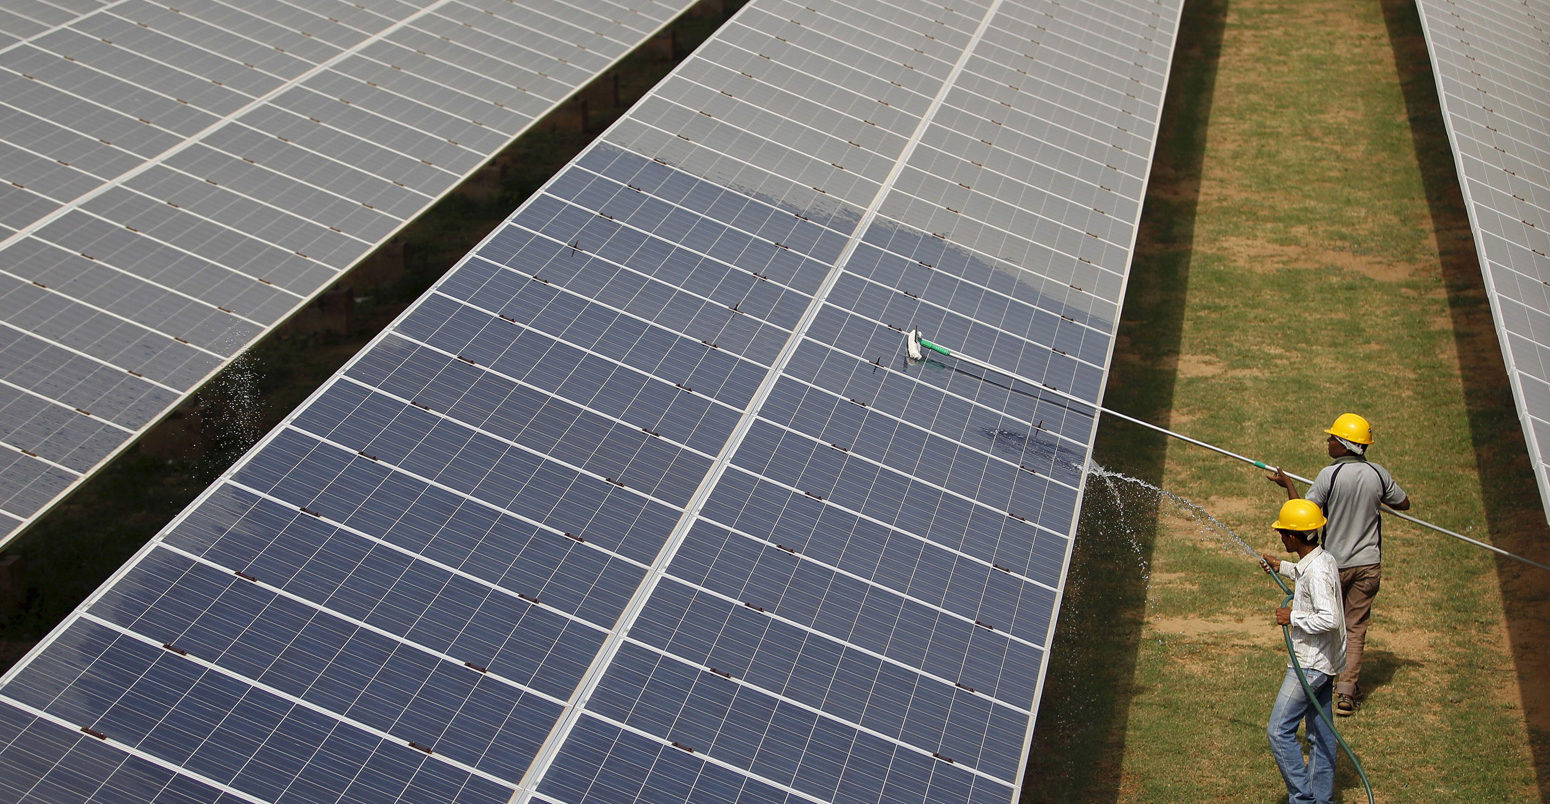 Workers clean photovoltaic panels inside a solar power plant in Gujarat, India.